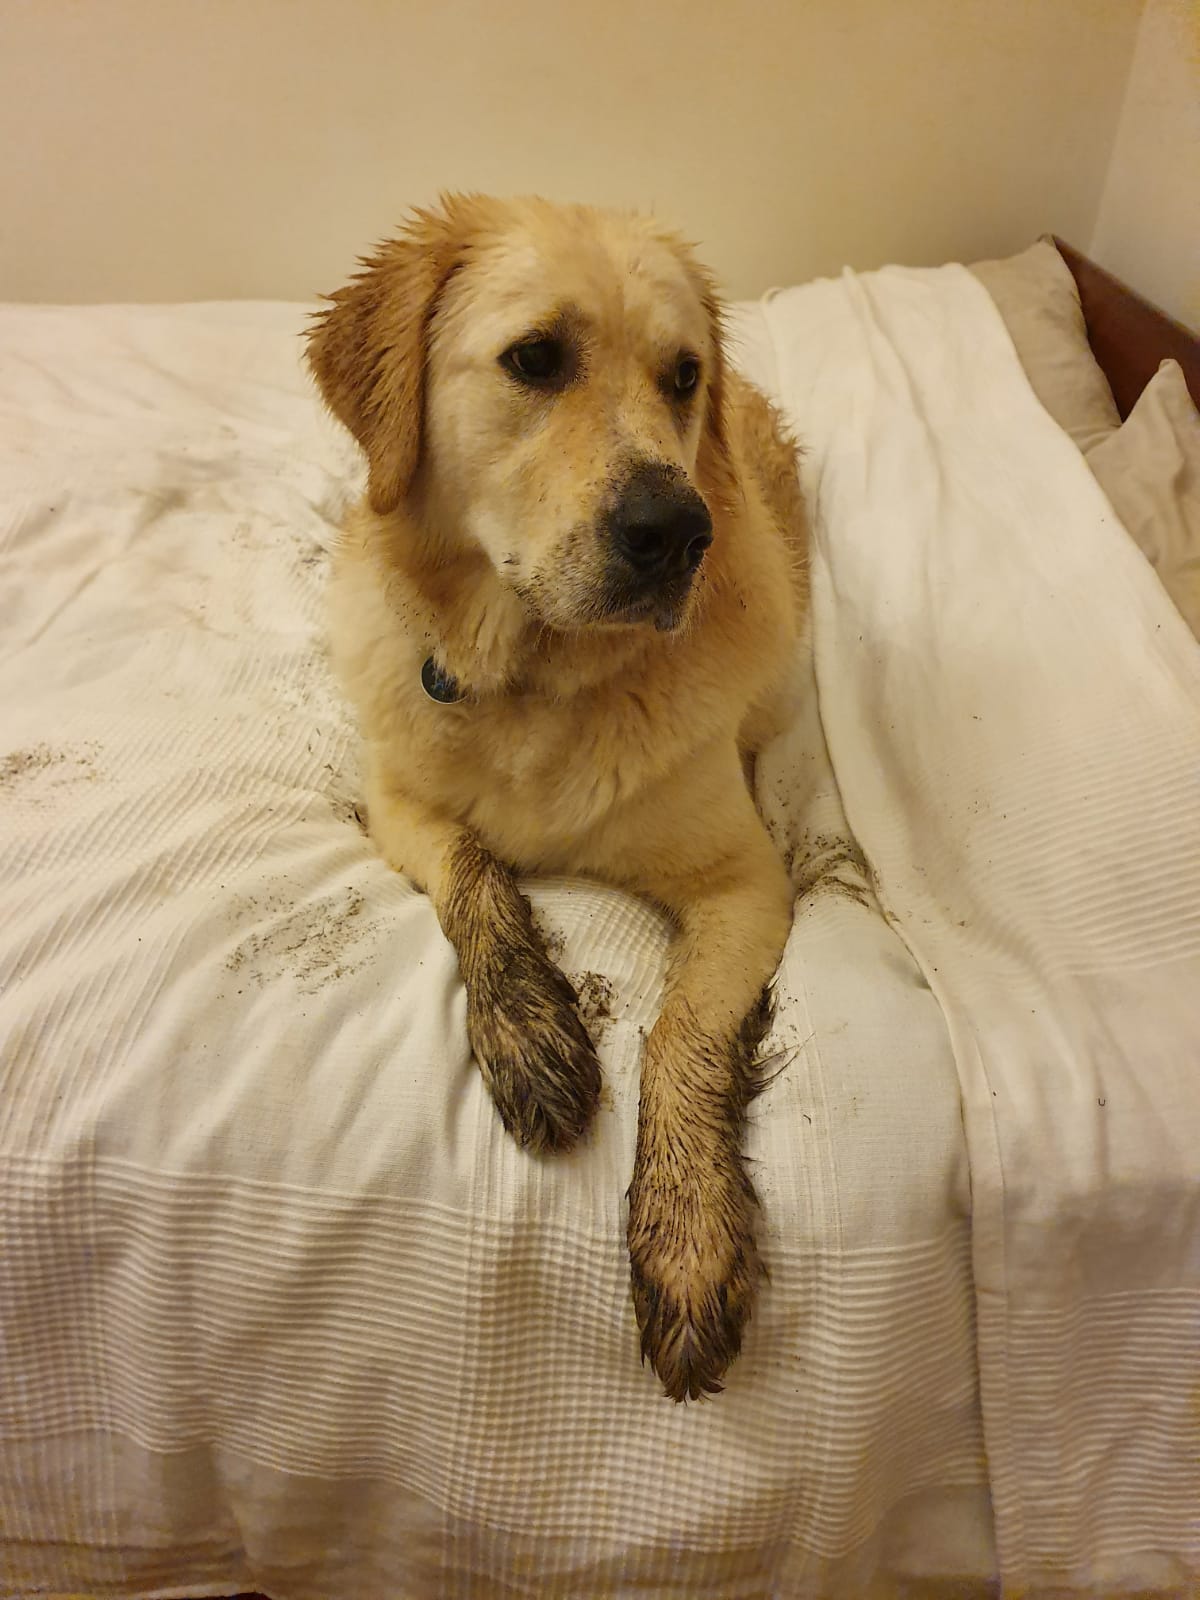 Luna with muddy paws